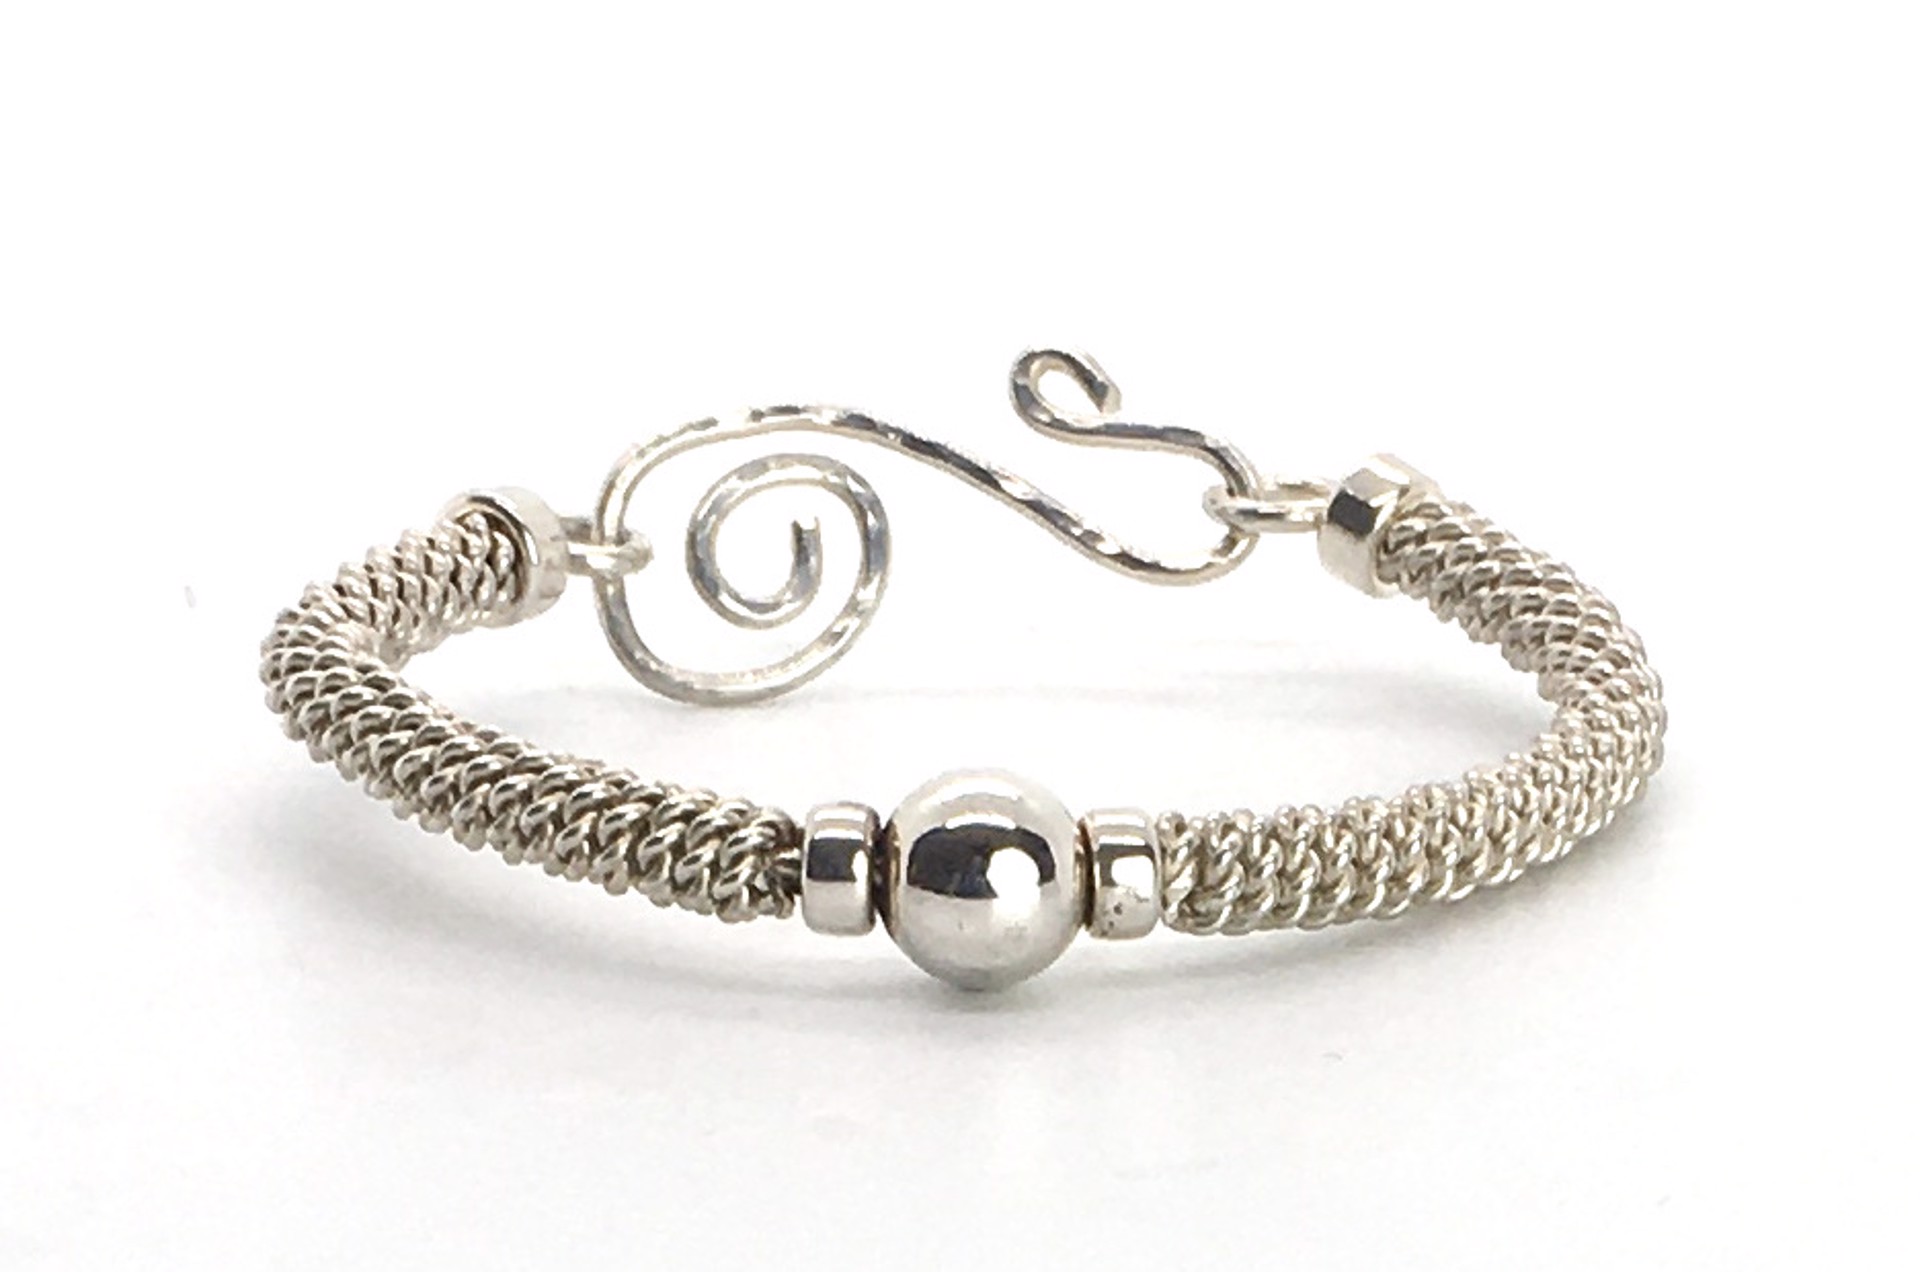 Bracelet - Woven Sterling Silver with Silver Bead by Suzanne Woodworth